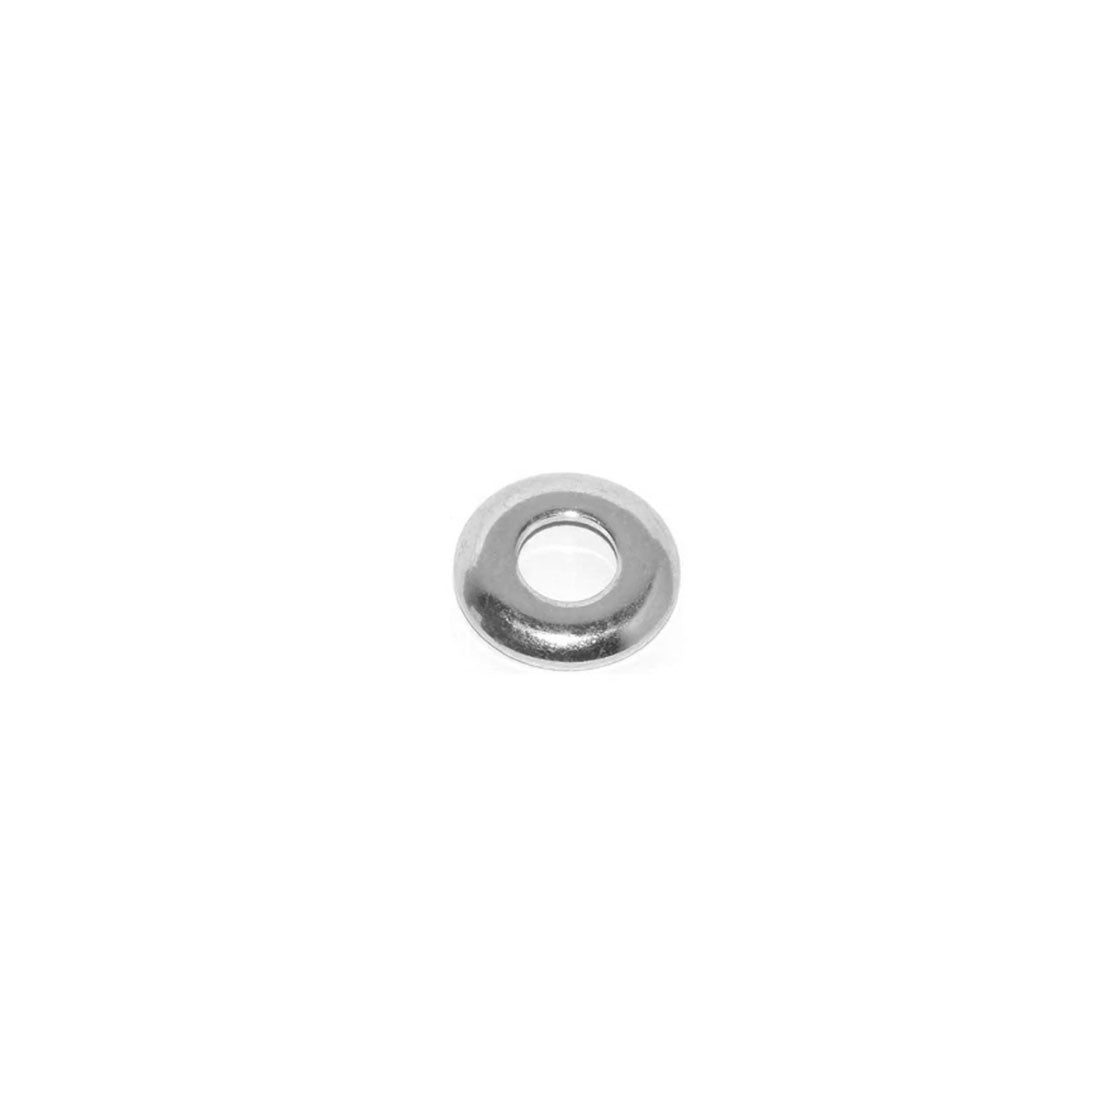 Mini Logo Top Cup Washer - Single Skateboard Hardware and Parts